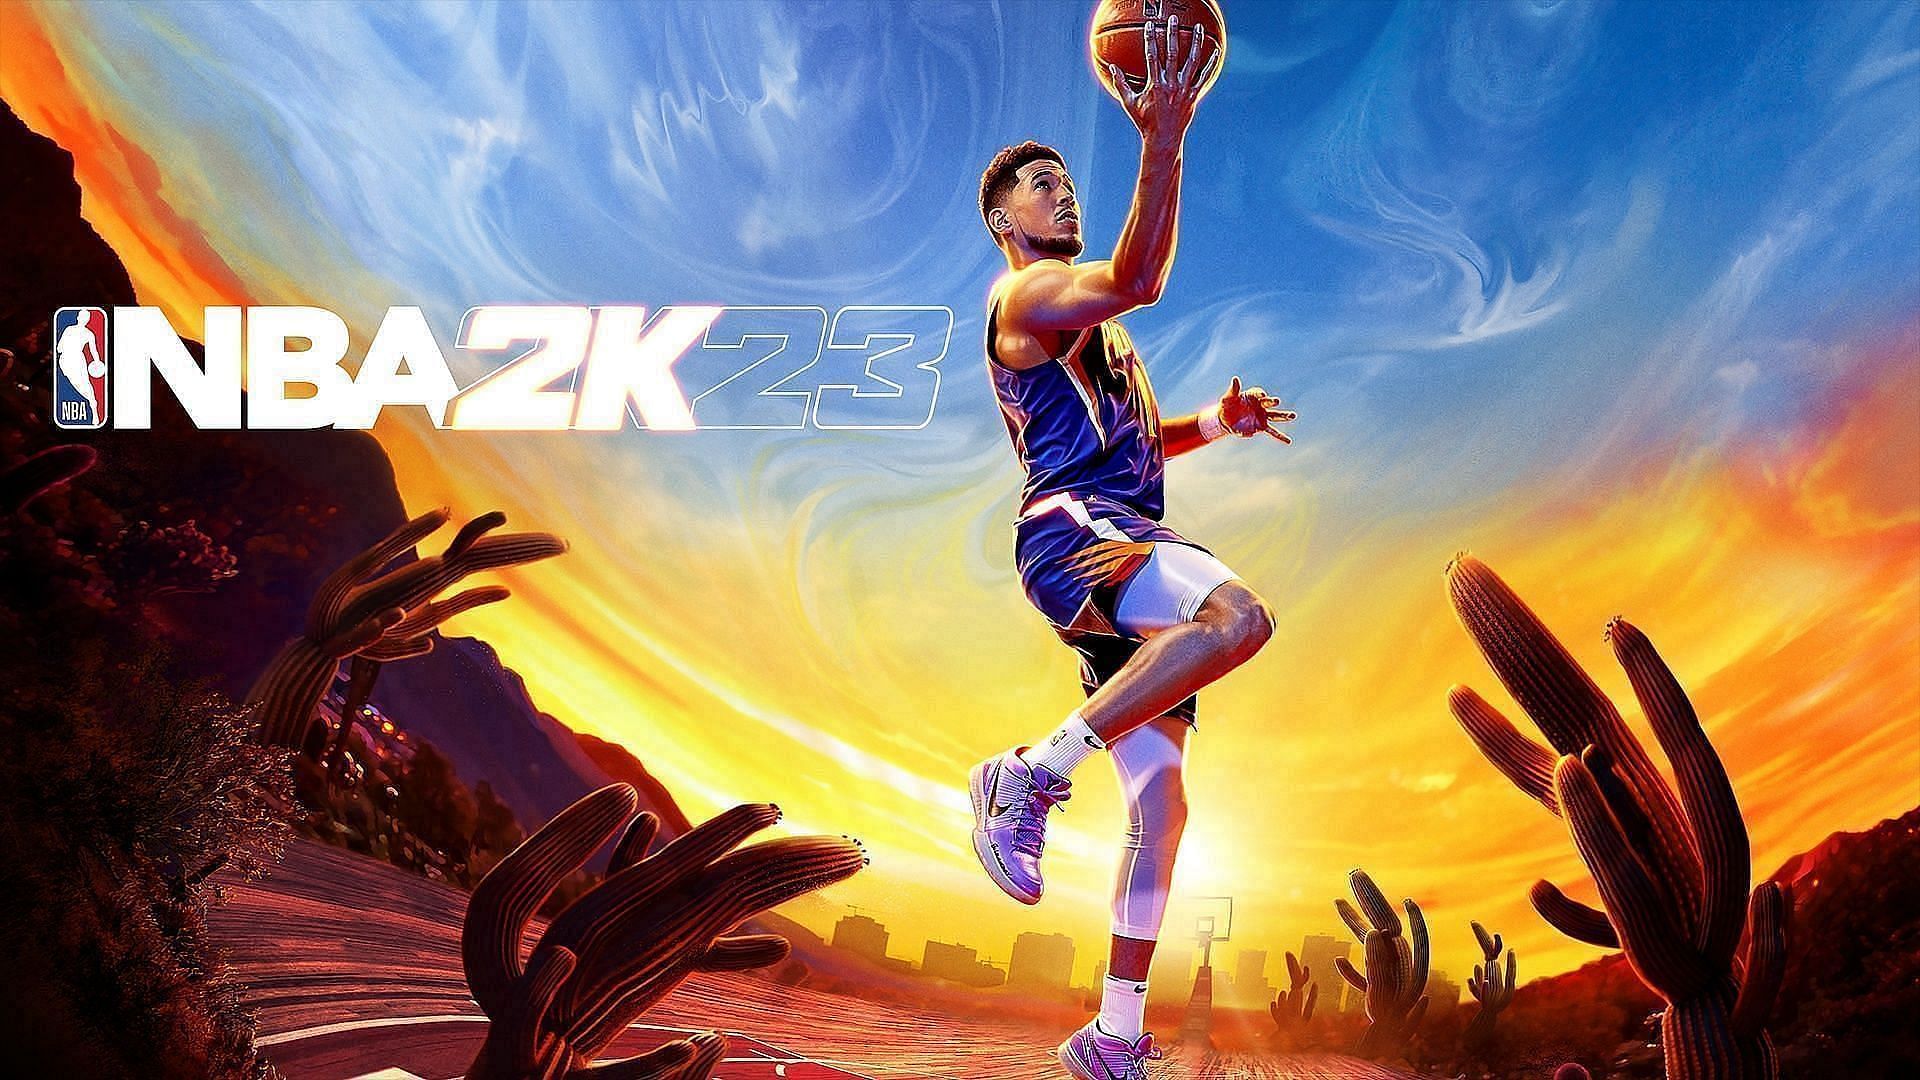 nba-2k23-rebirth-quest-location-how-to-find-ronnie-2k-in-the-city